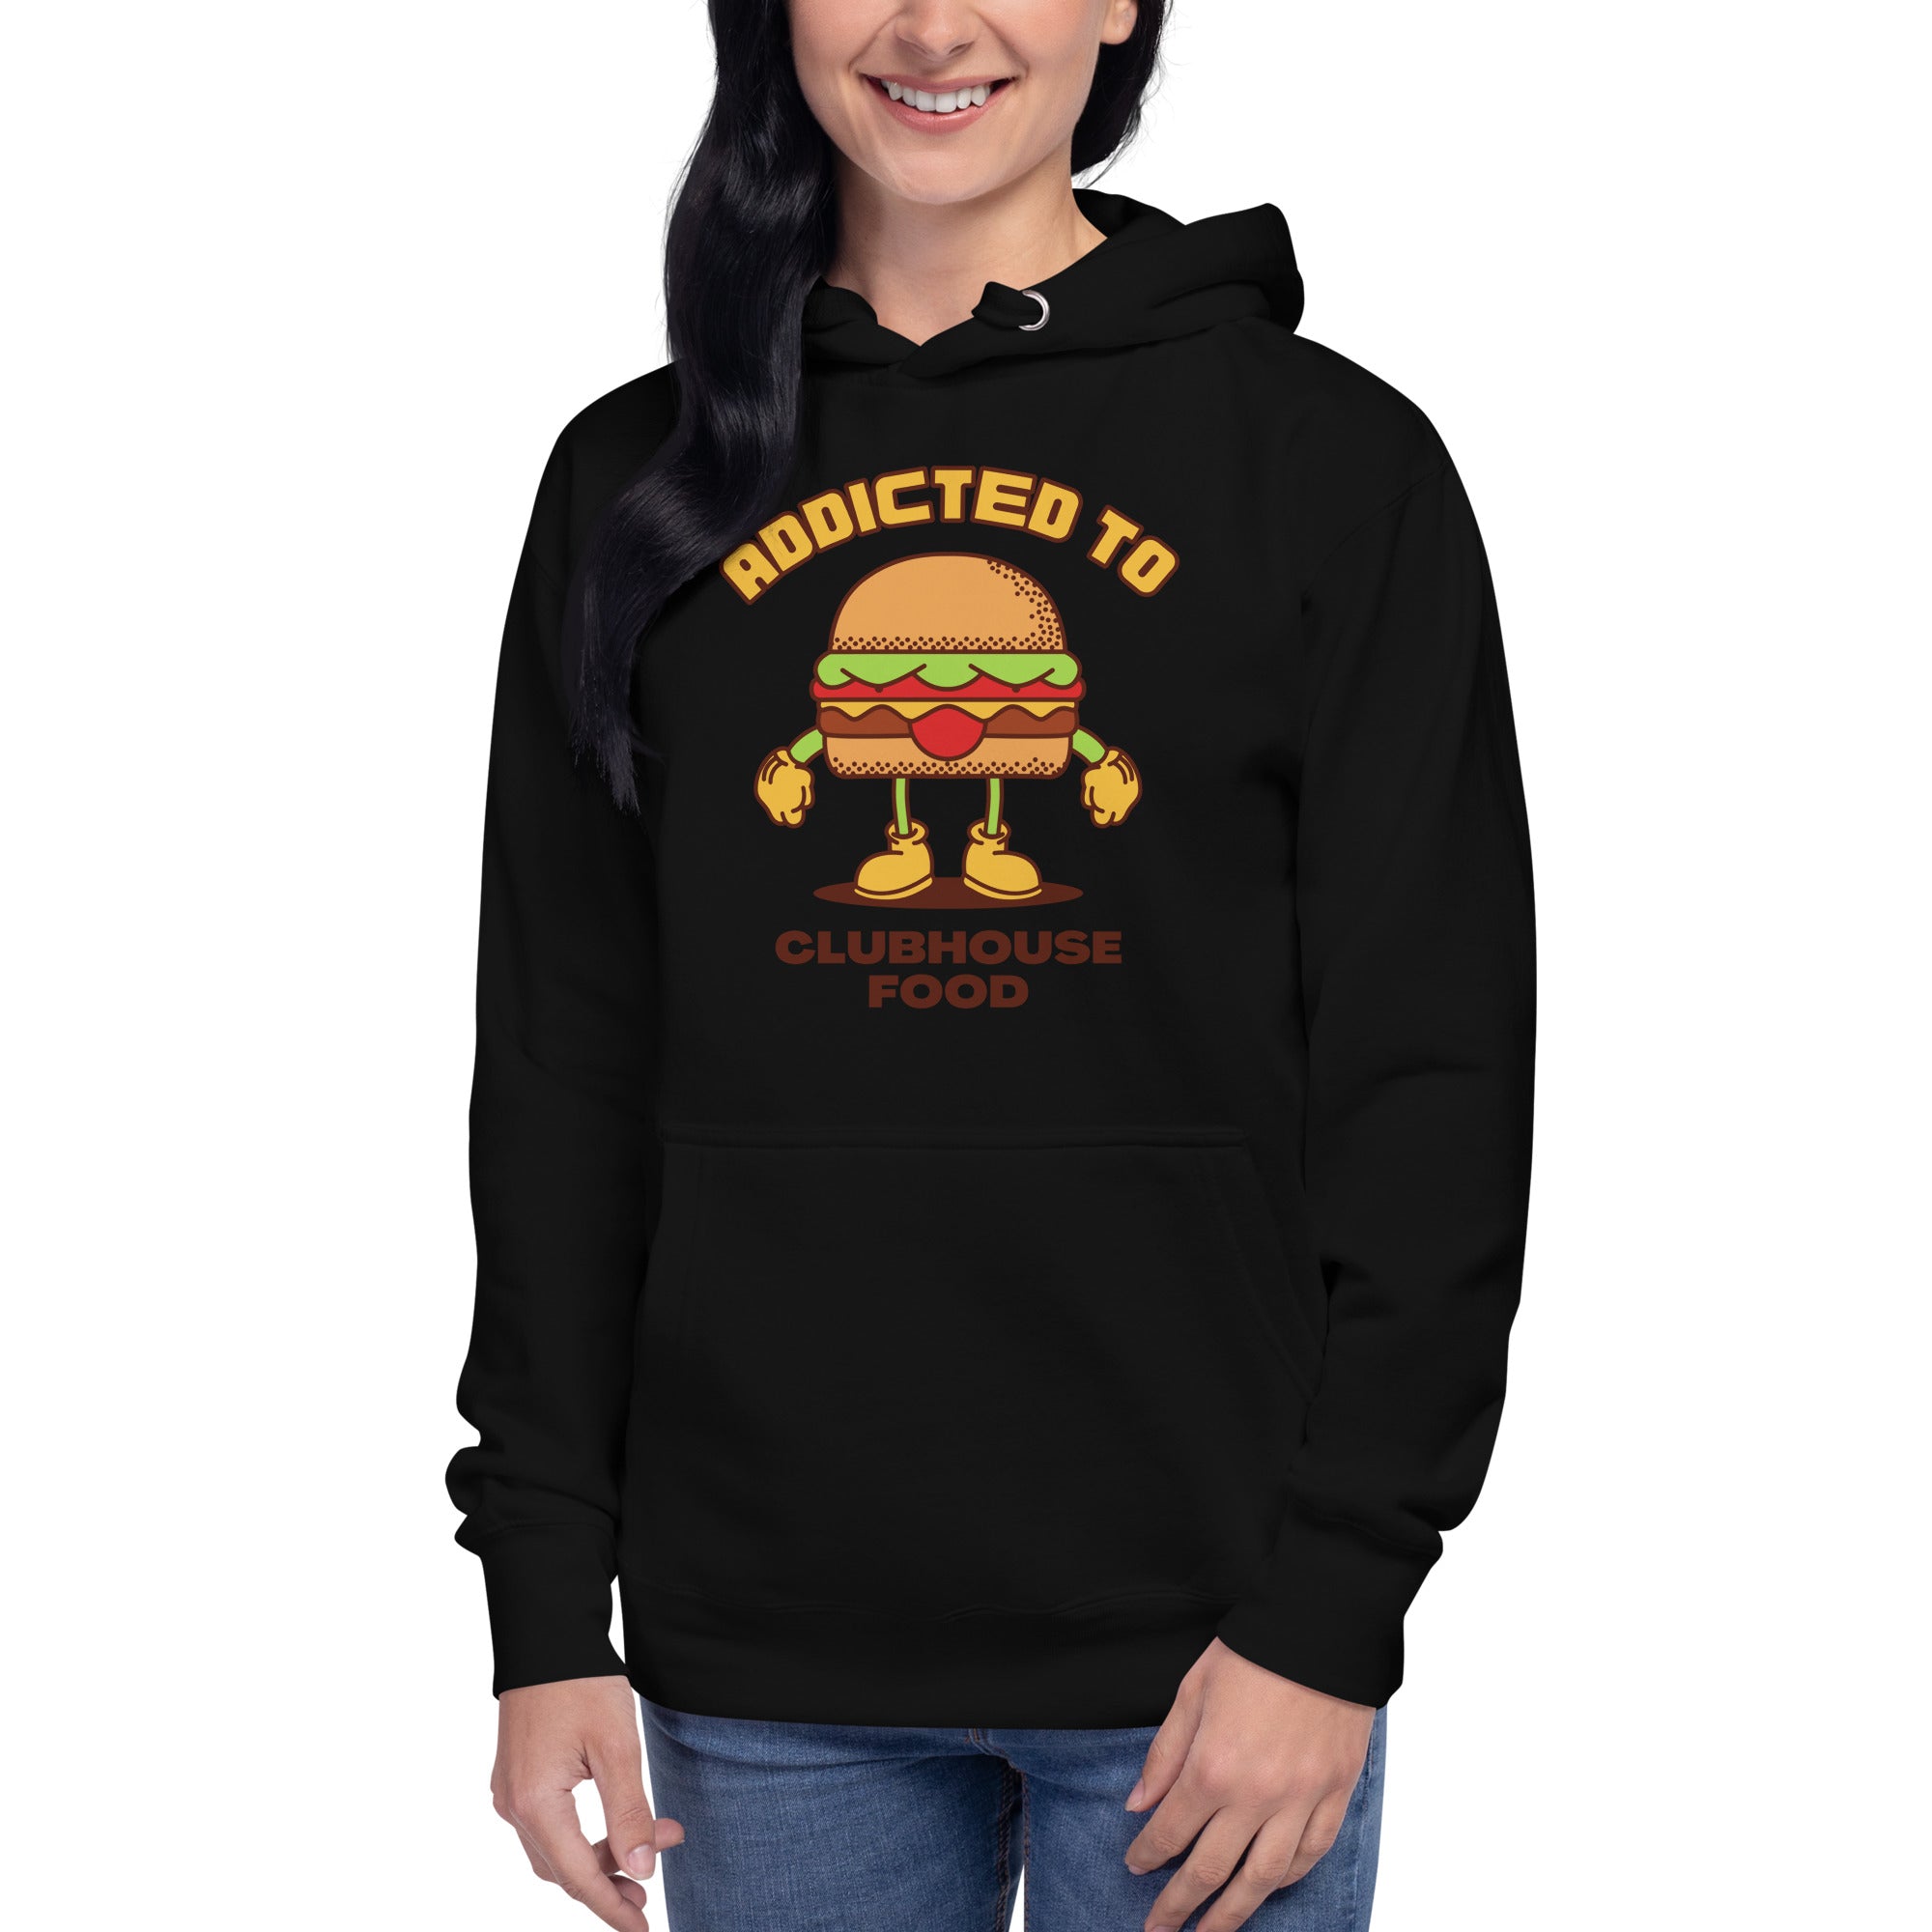 Addicted To Clubhouse Food Women's Heavy Hoodie